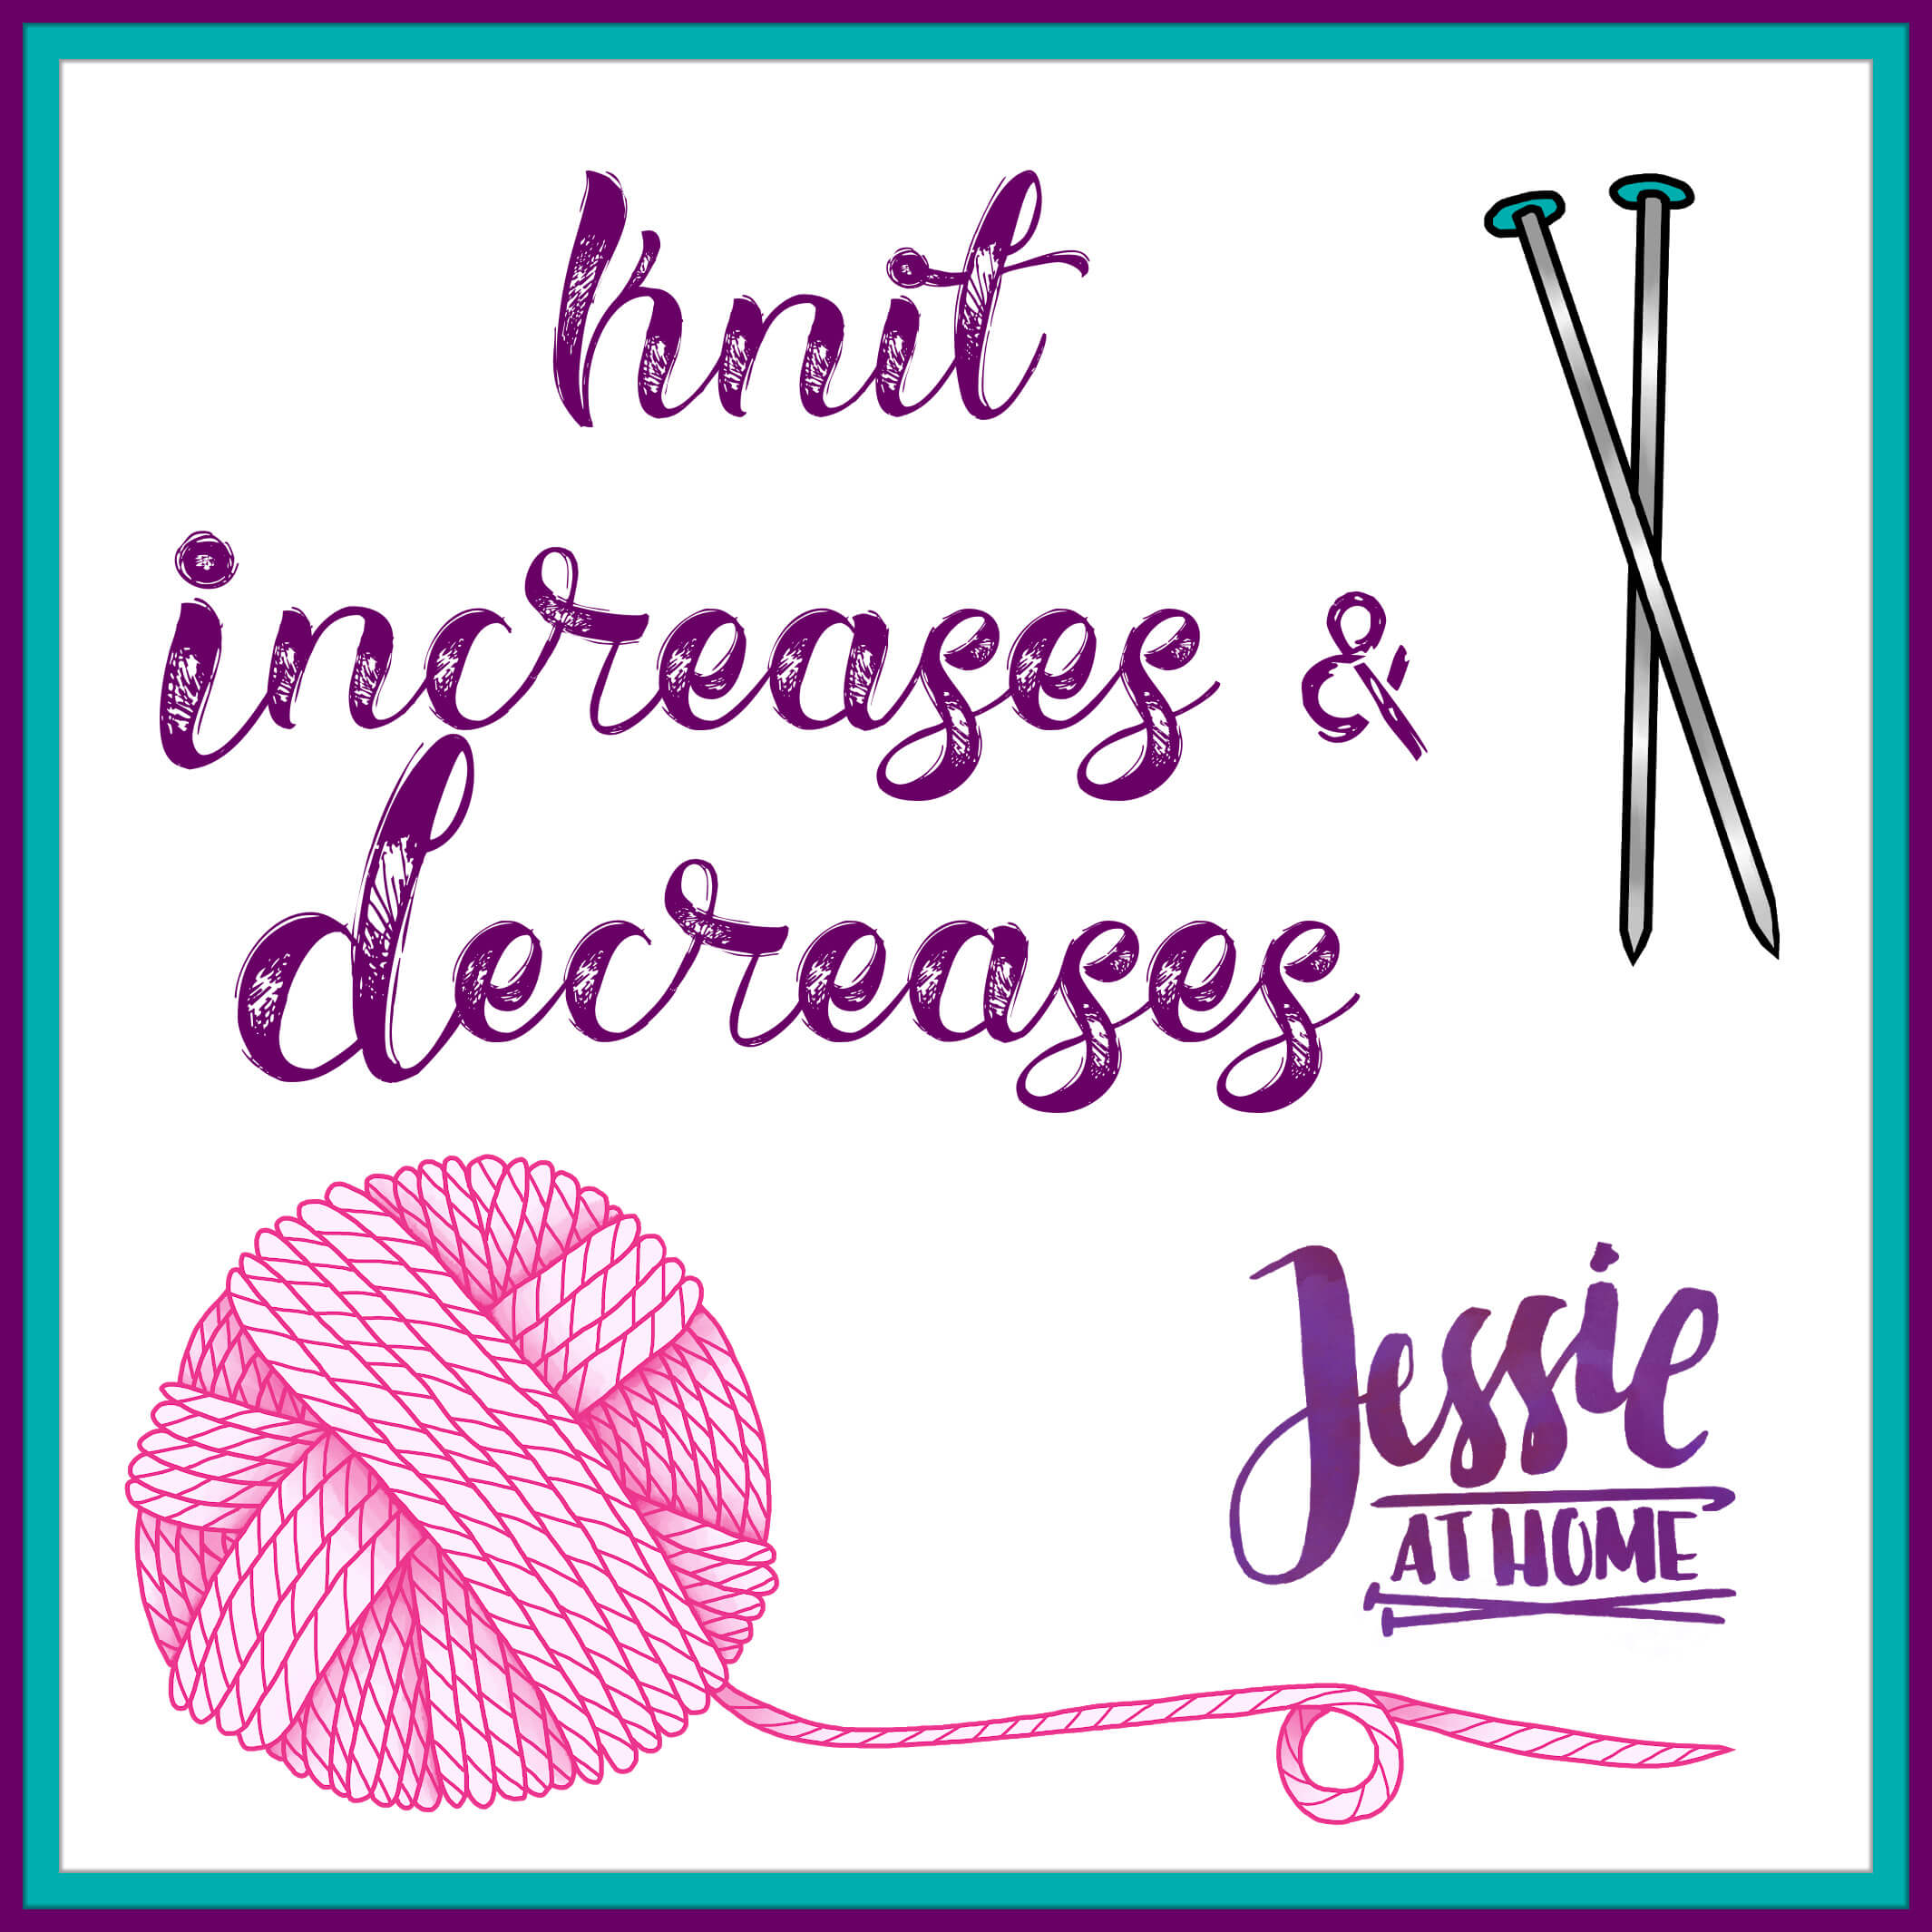 Knit Increases & Decreases Menu on Jessie At Home